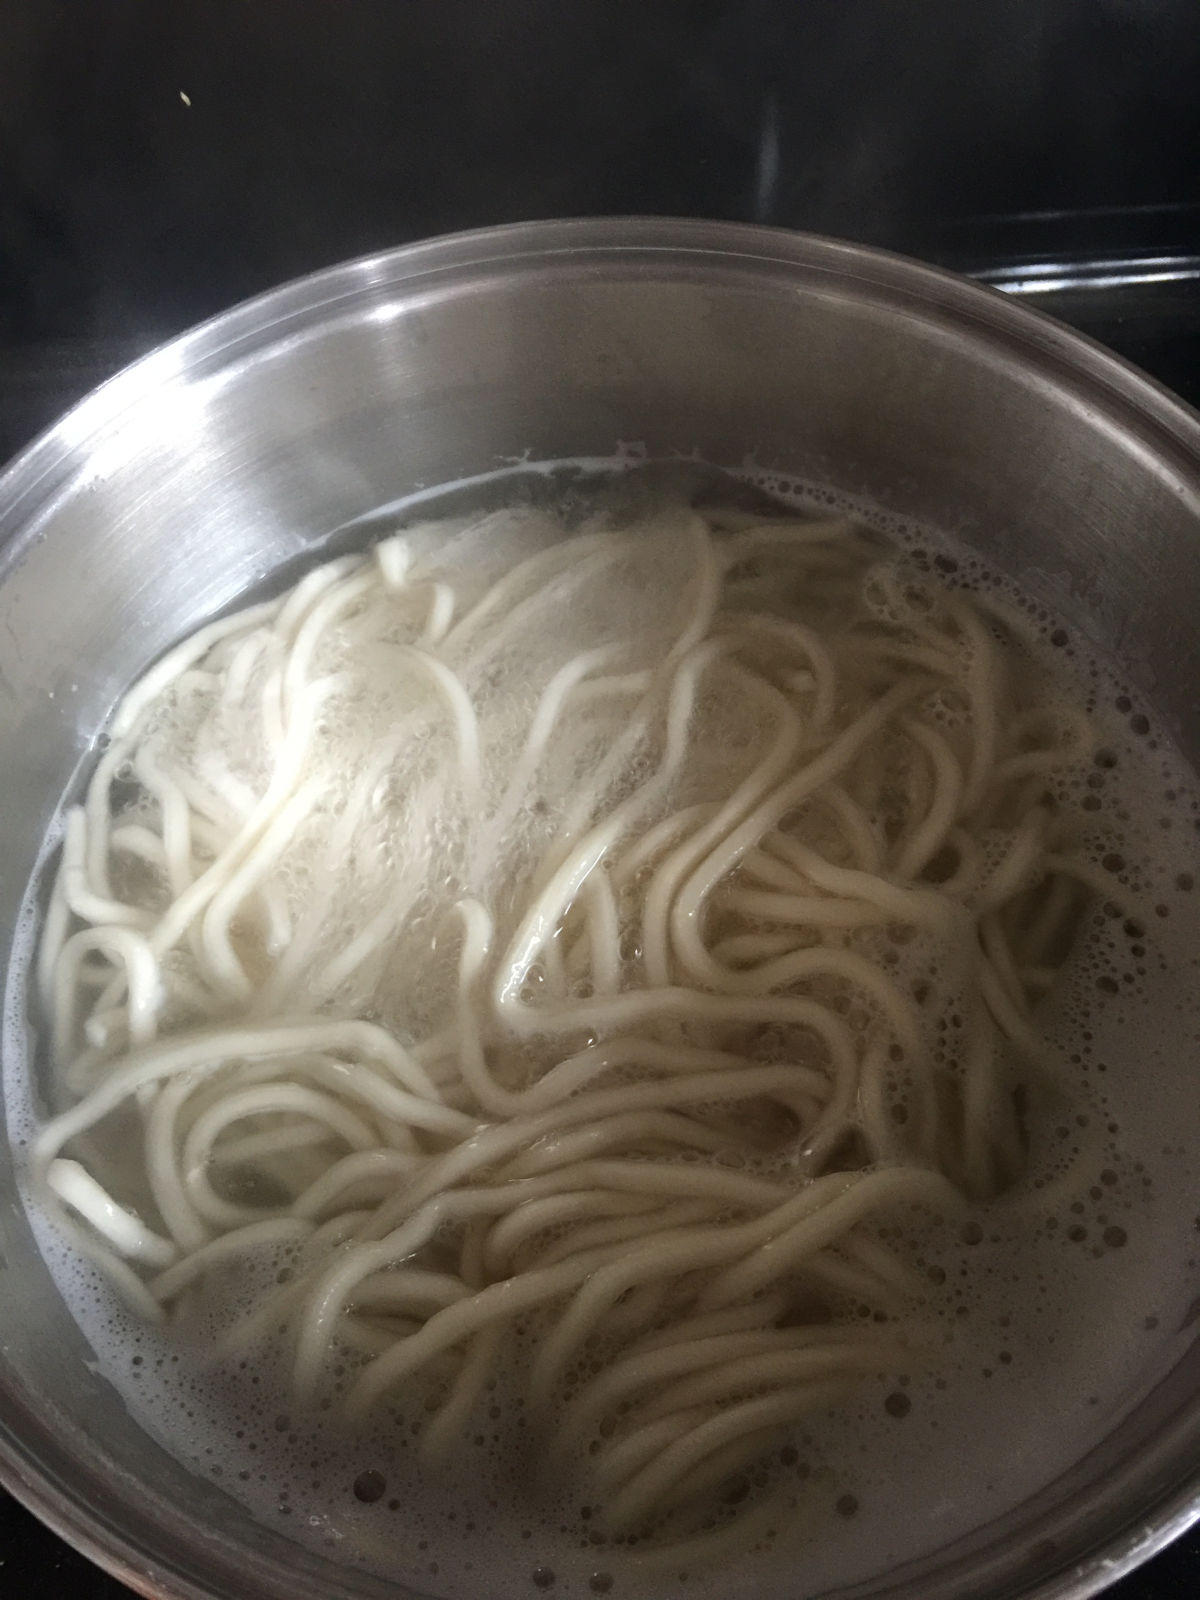 Overhead view of Shanghai thick noodles cooking in boiling water in a pot.